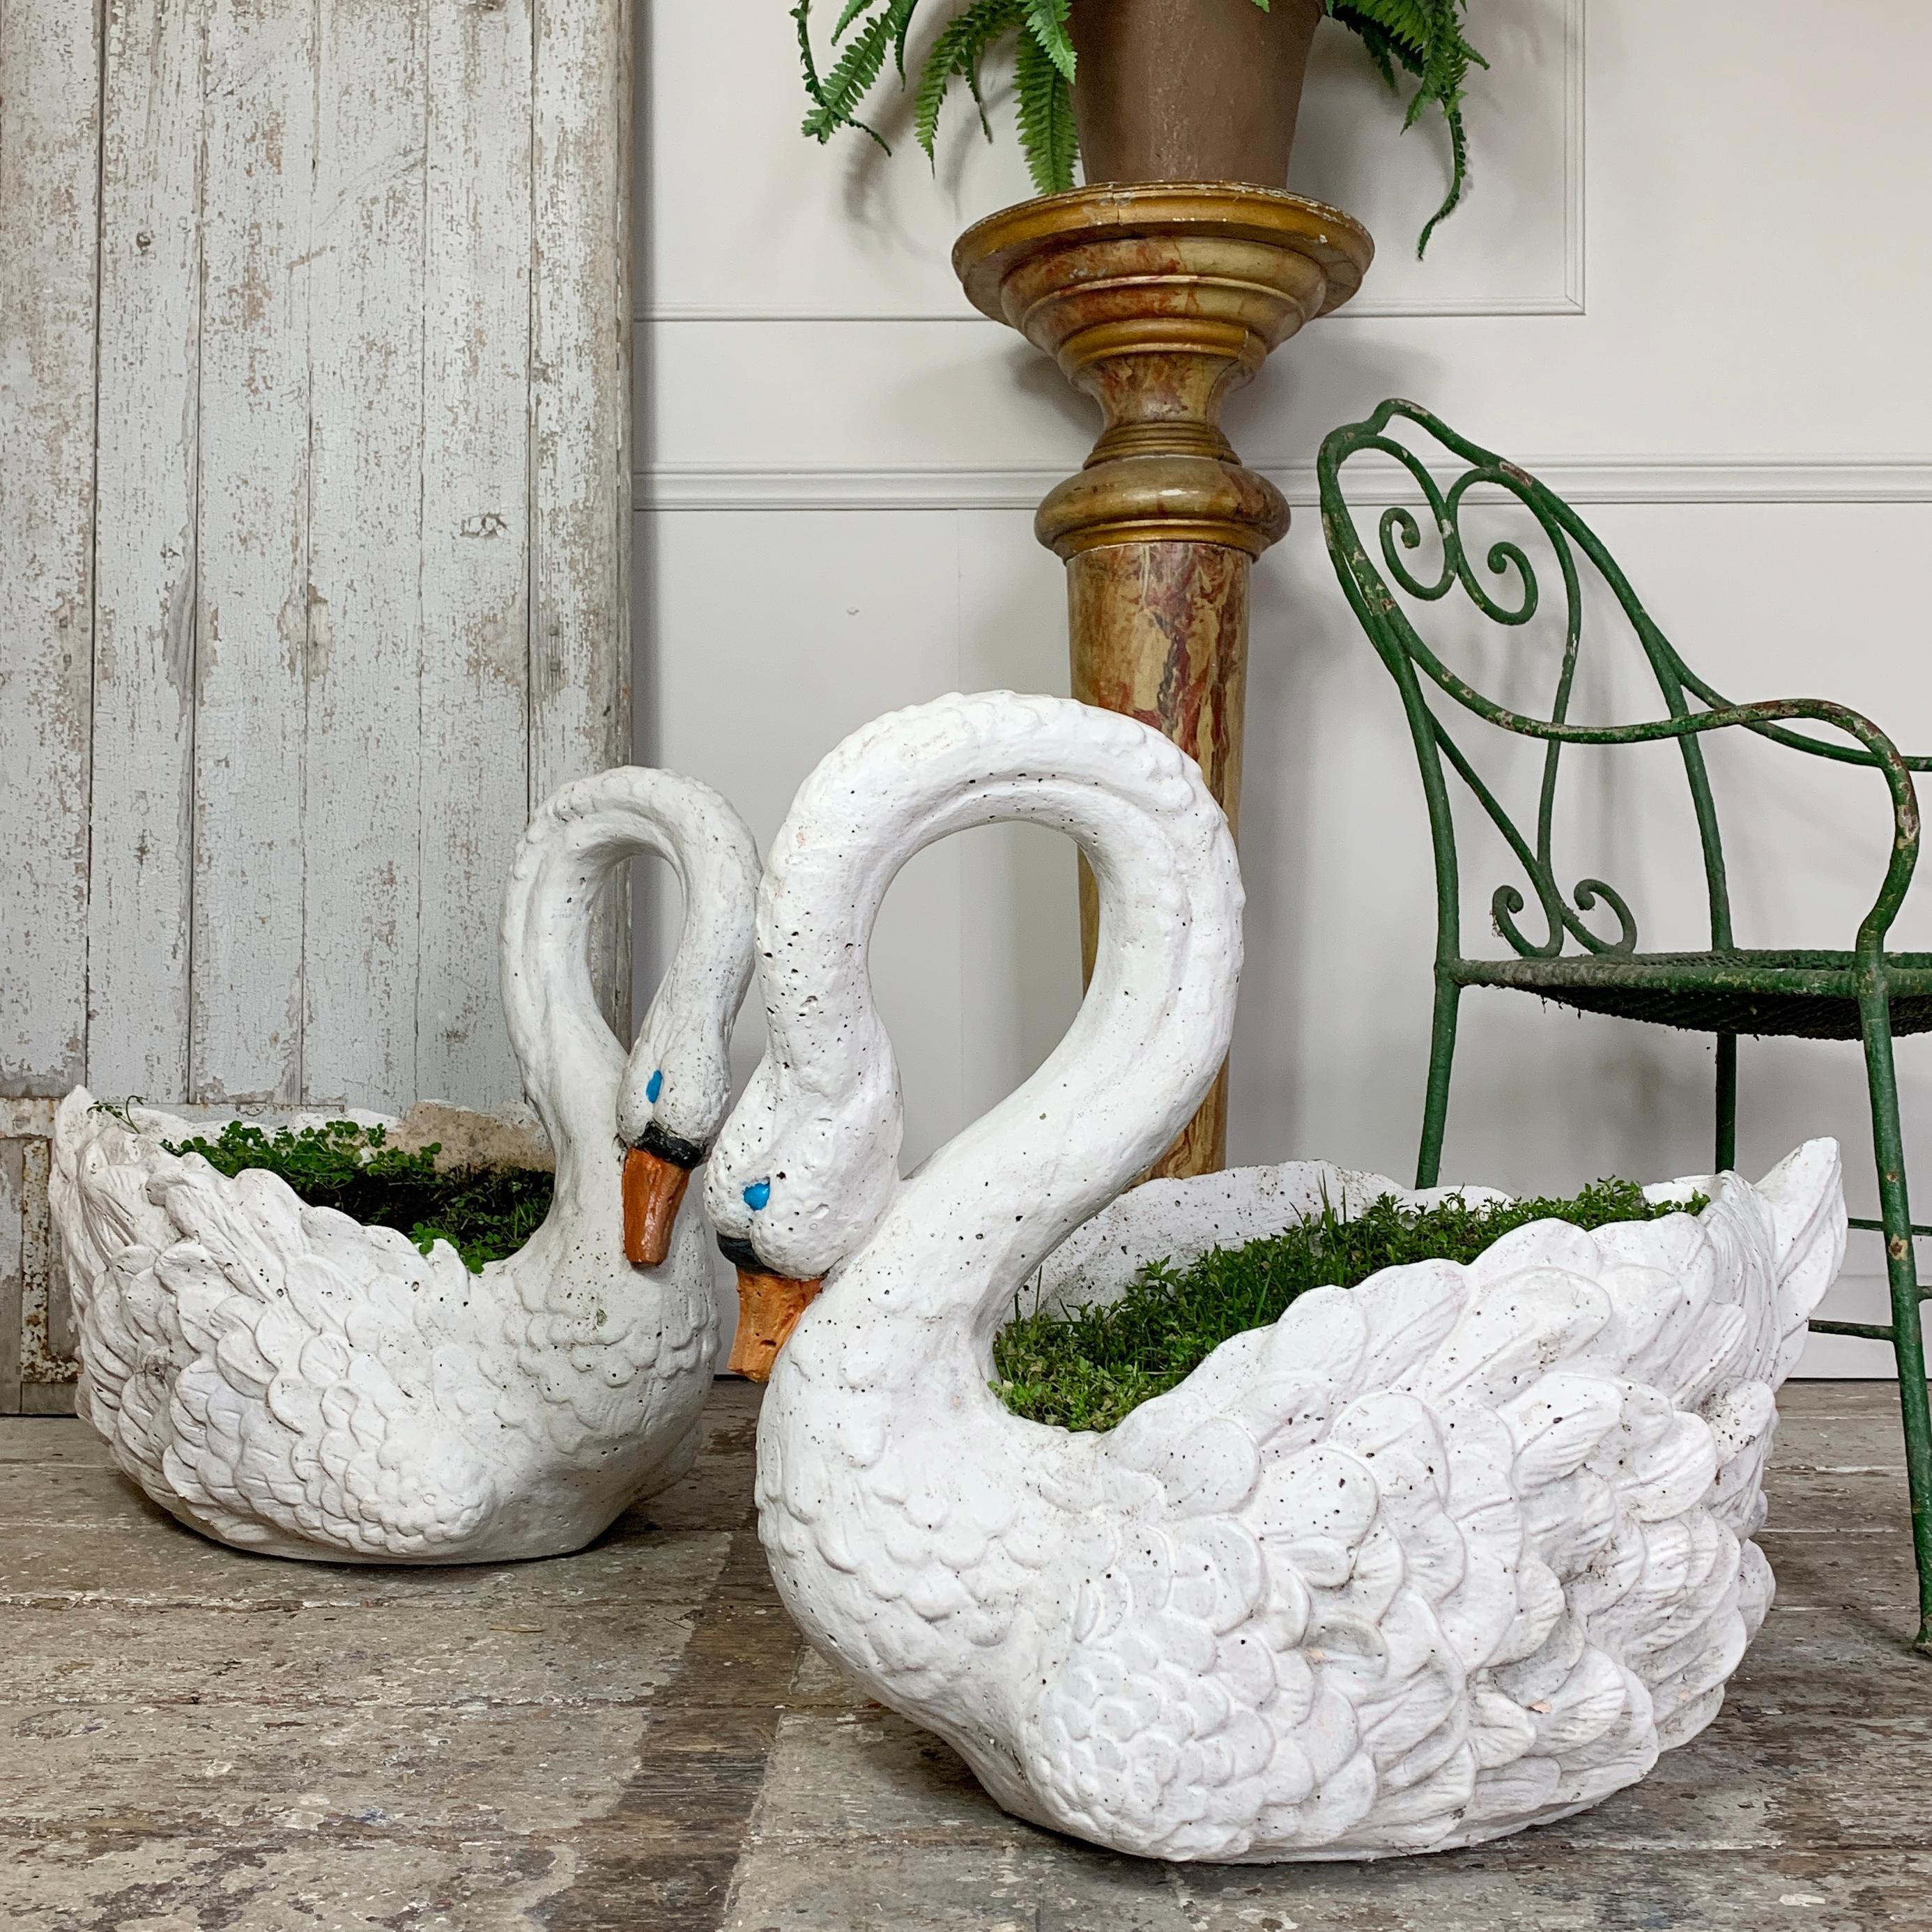 A rare matching pair of 1950s French life-size swan planters
In great condition, with wear commensurate with their age
Historical paint

Extremely heavy pieces approximate 65kg each

Rare and high quality, well made pieces
Measures: 71cm